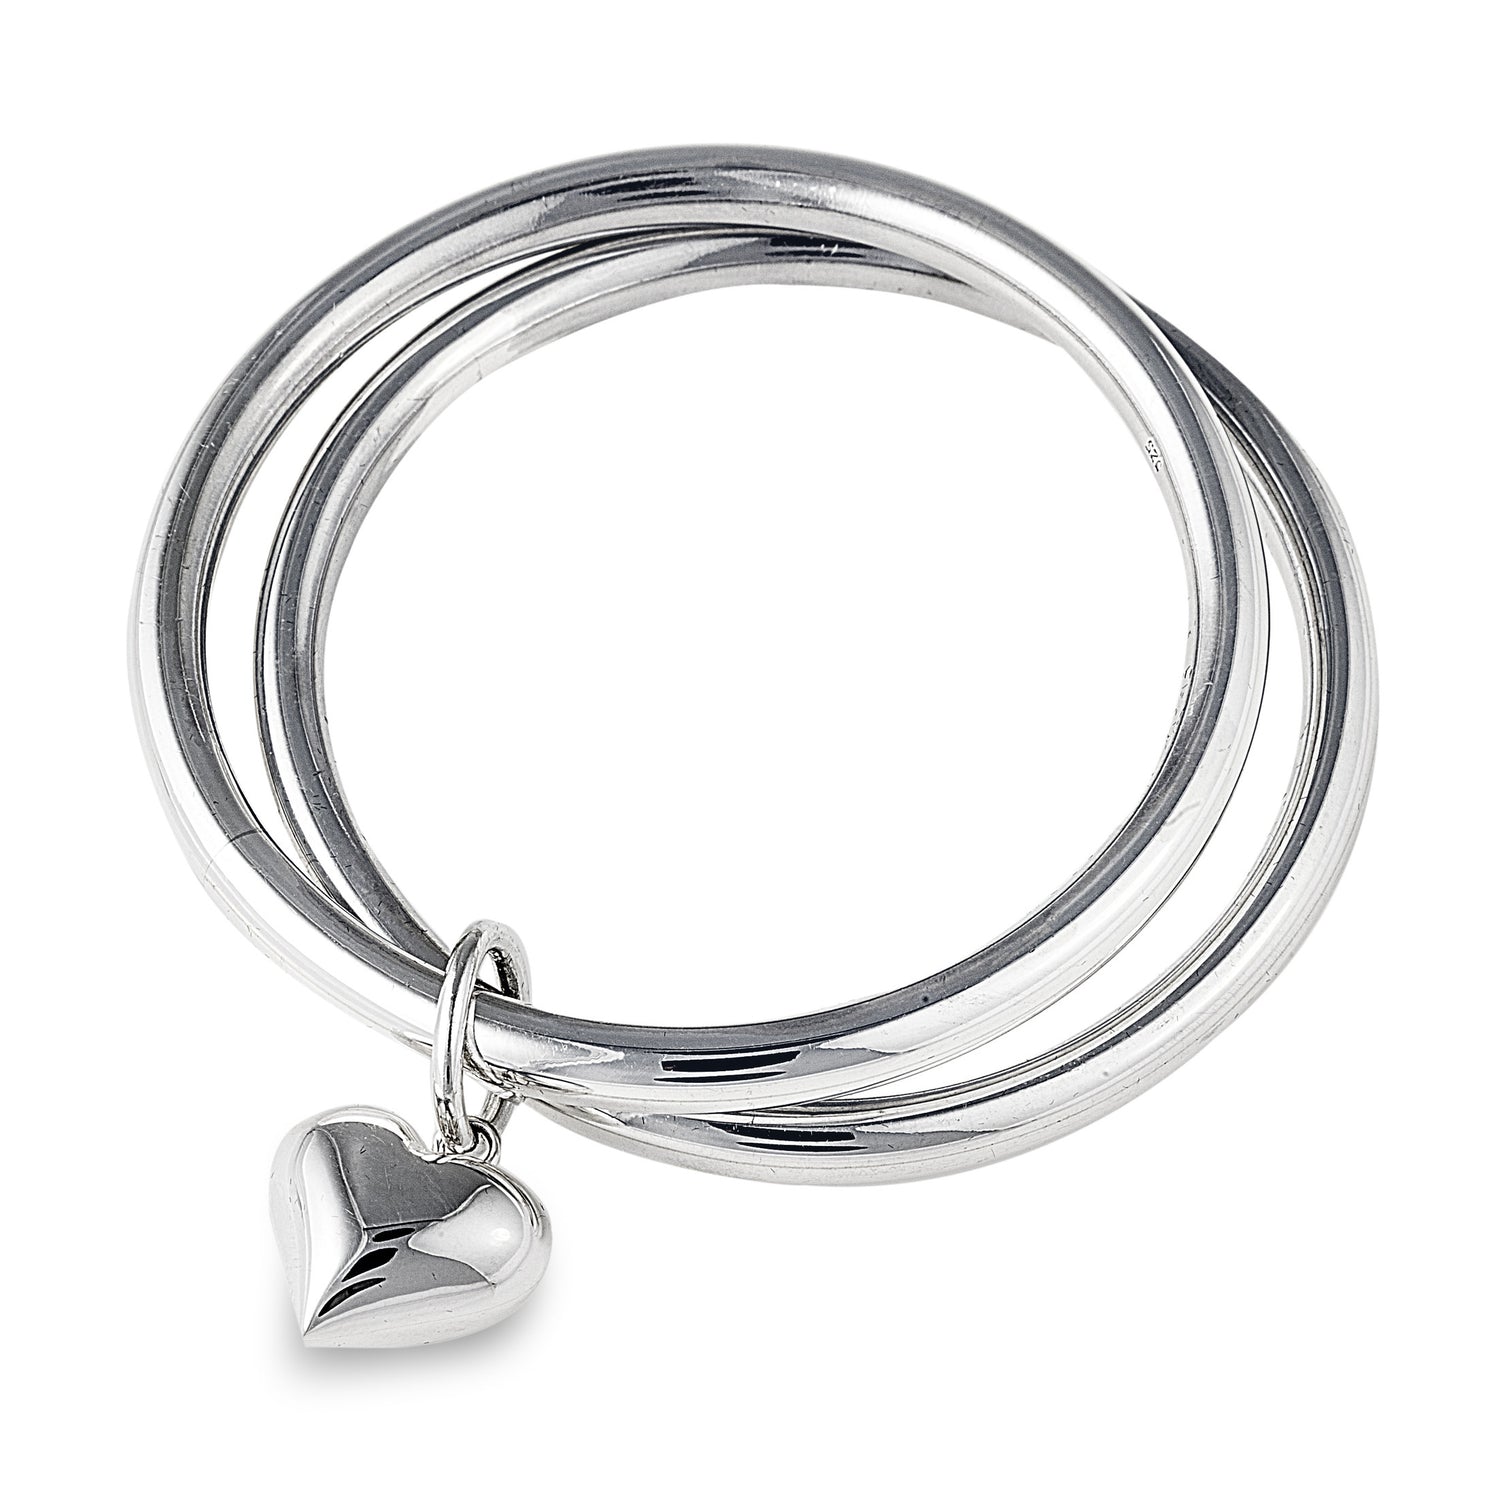 Eden Eclipse Bangle is made up of two single bangles in 925 sterling silver joined together with a band and featuring a heart charm. Small size: Approx 6.6cm in diameter. Large size is also available. Affordable luxury jewellery by Bellagio & Co. Worldwide Shipping plus FREE shipping for orders over $150 in Australia.